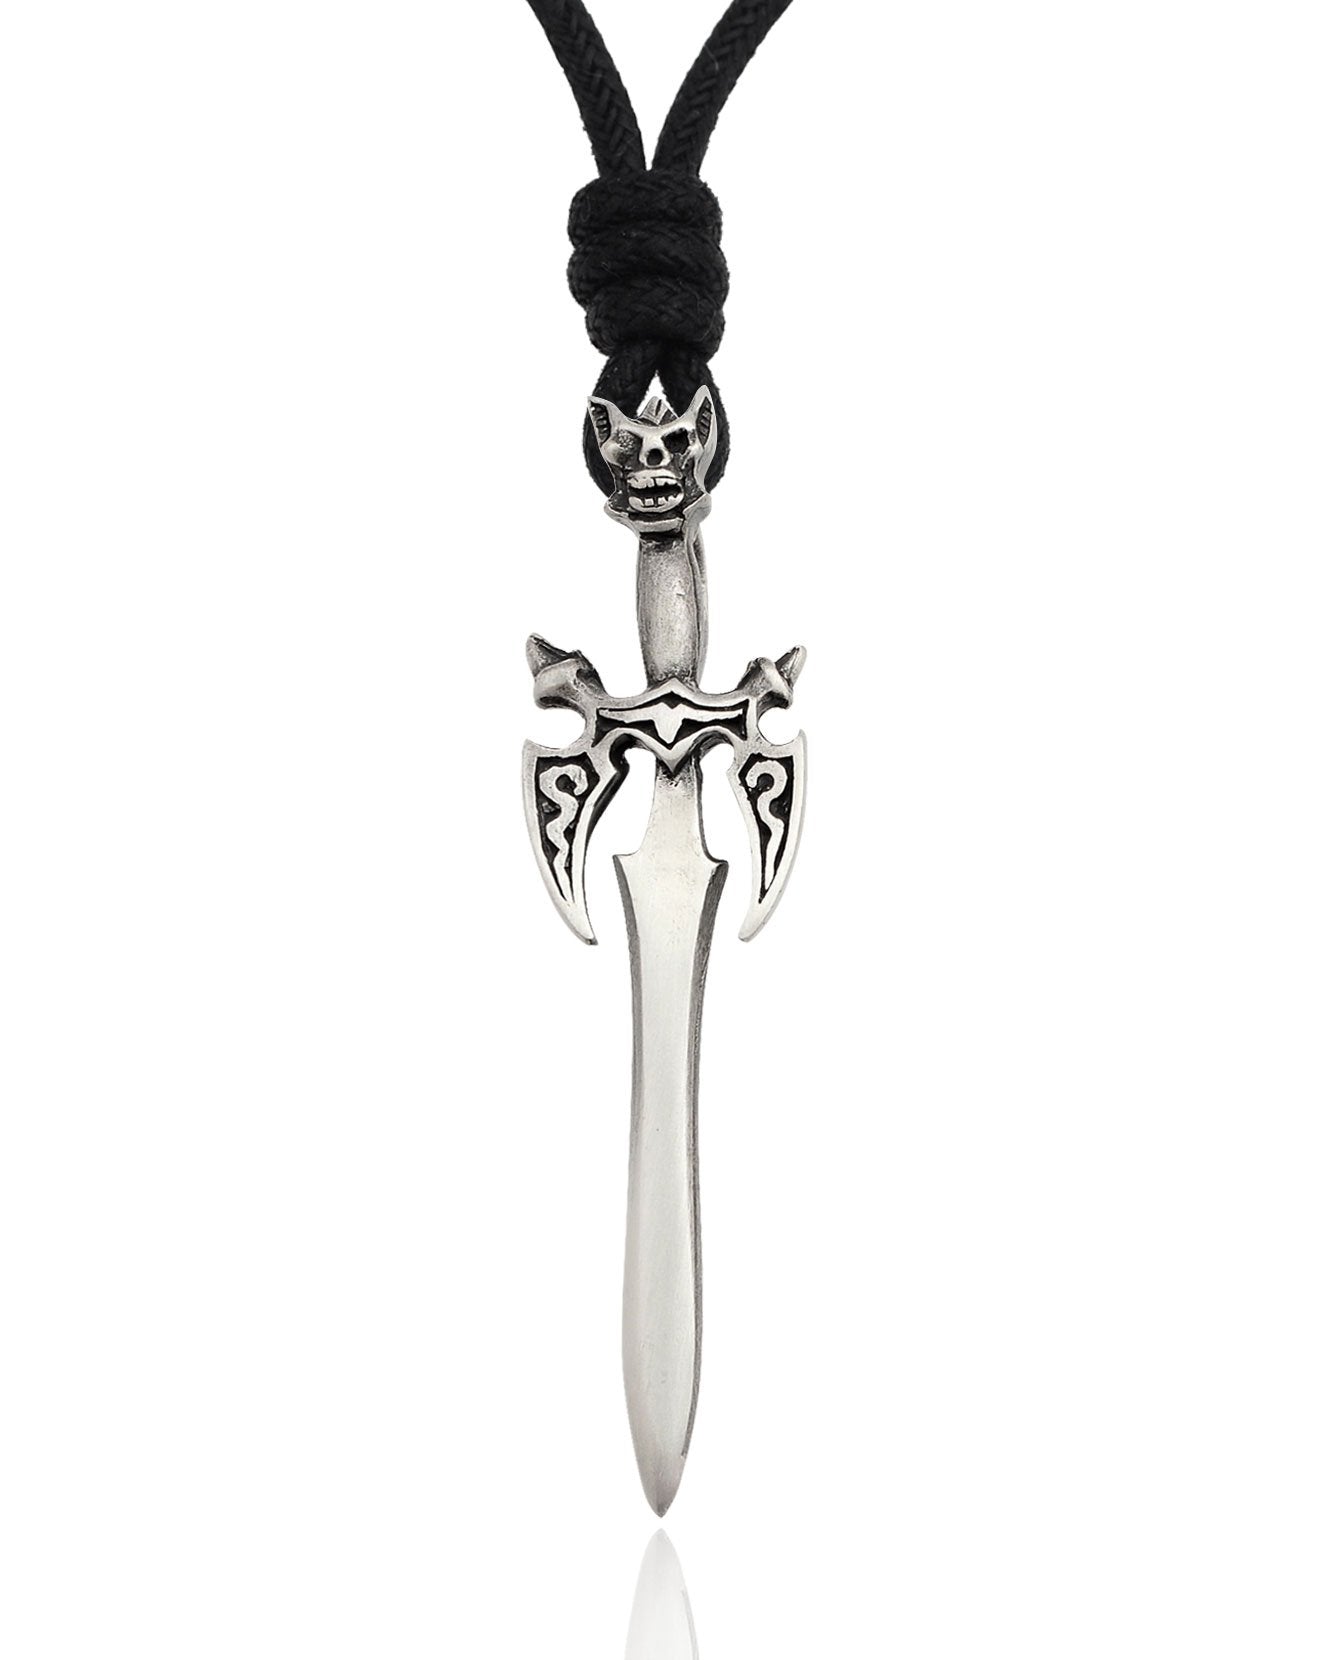 Battle Knight Amor Sword Silver Pewter Charm Necklace Pendant Jewelry